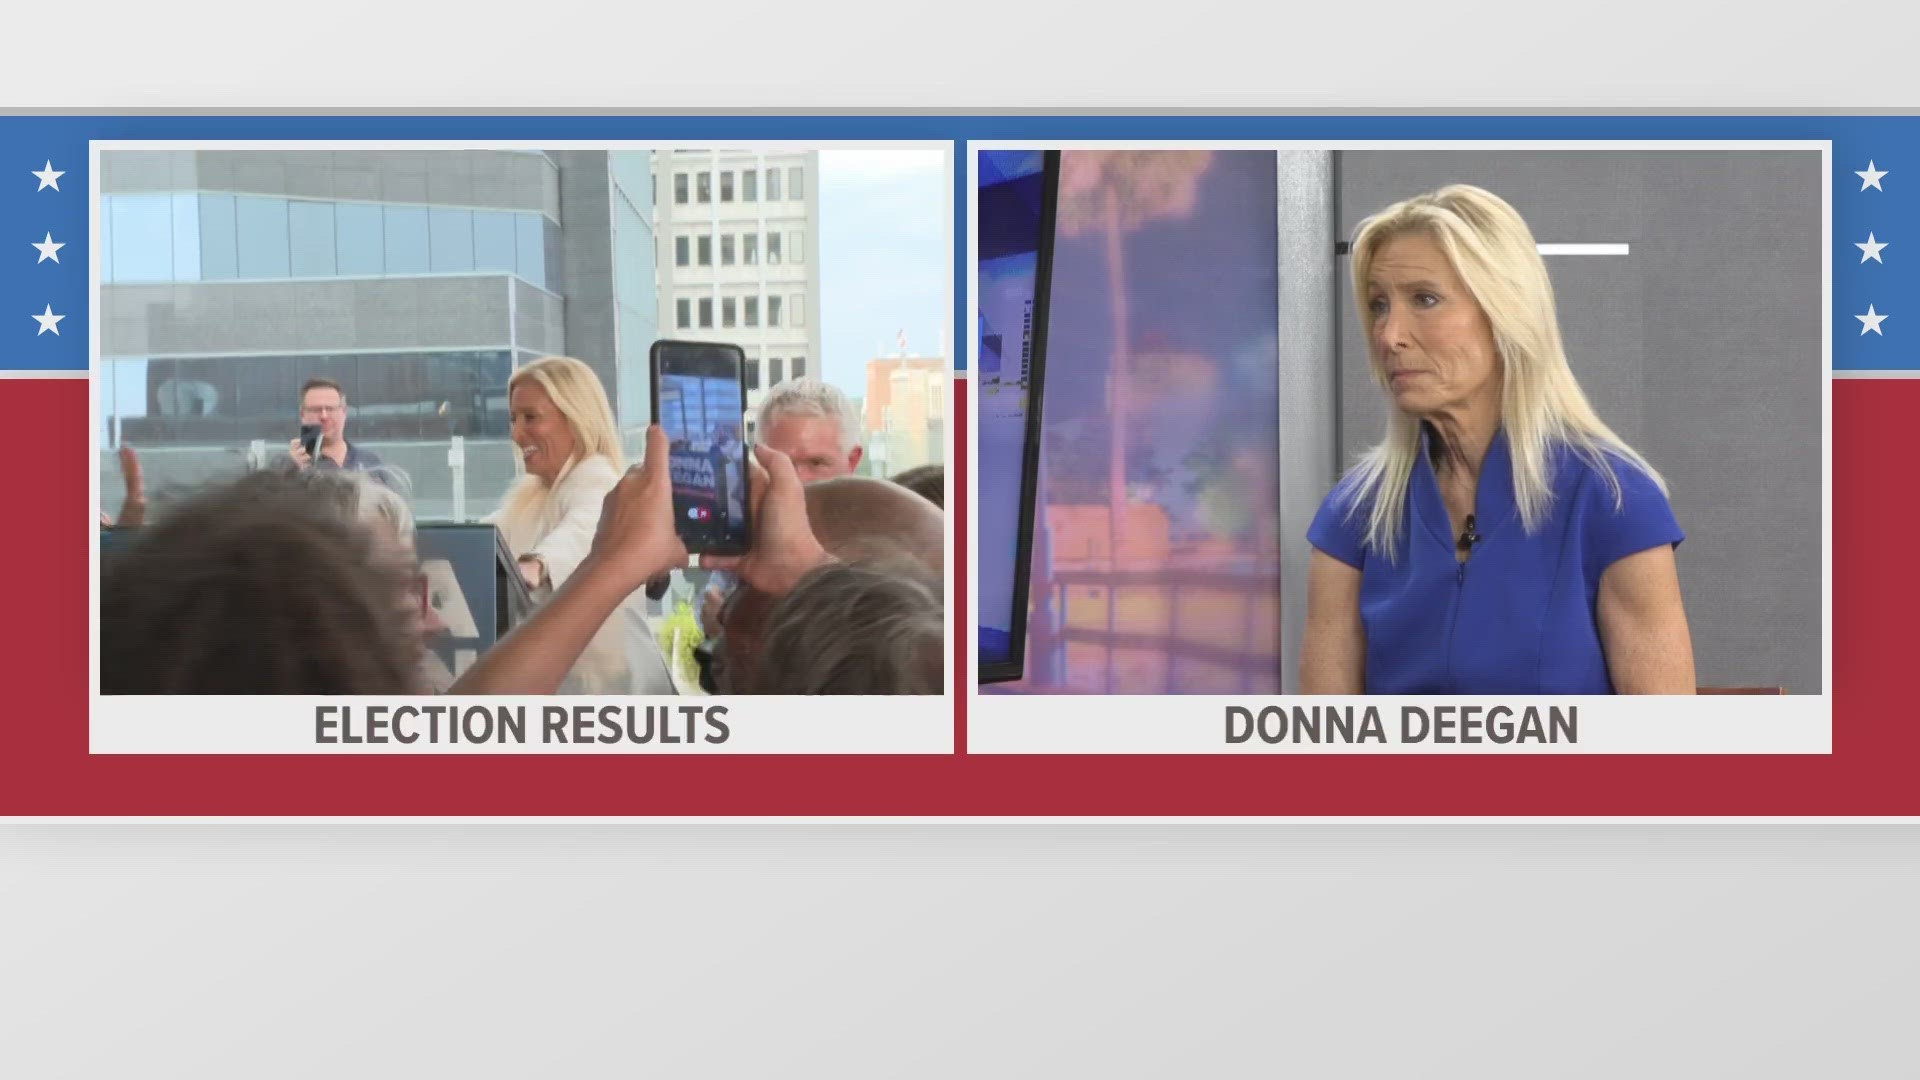 Correction: Donna Deegan is the second Democrat elected for Jacksonville Mayor in three decades.